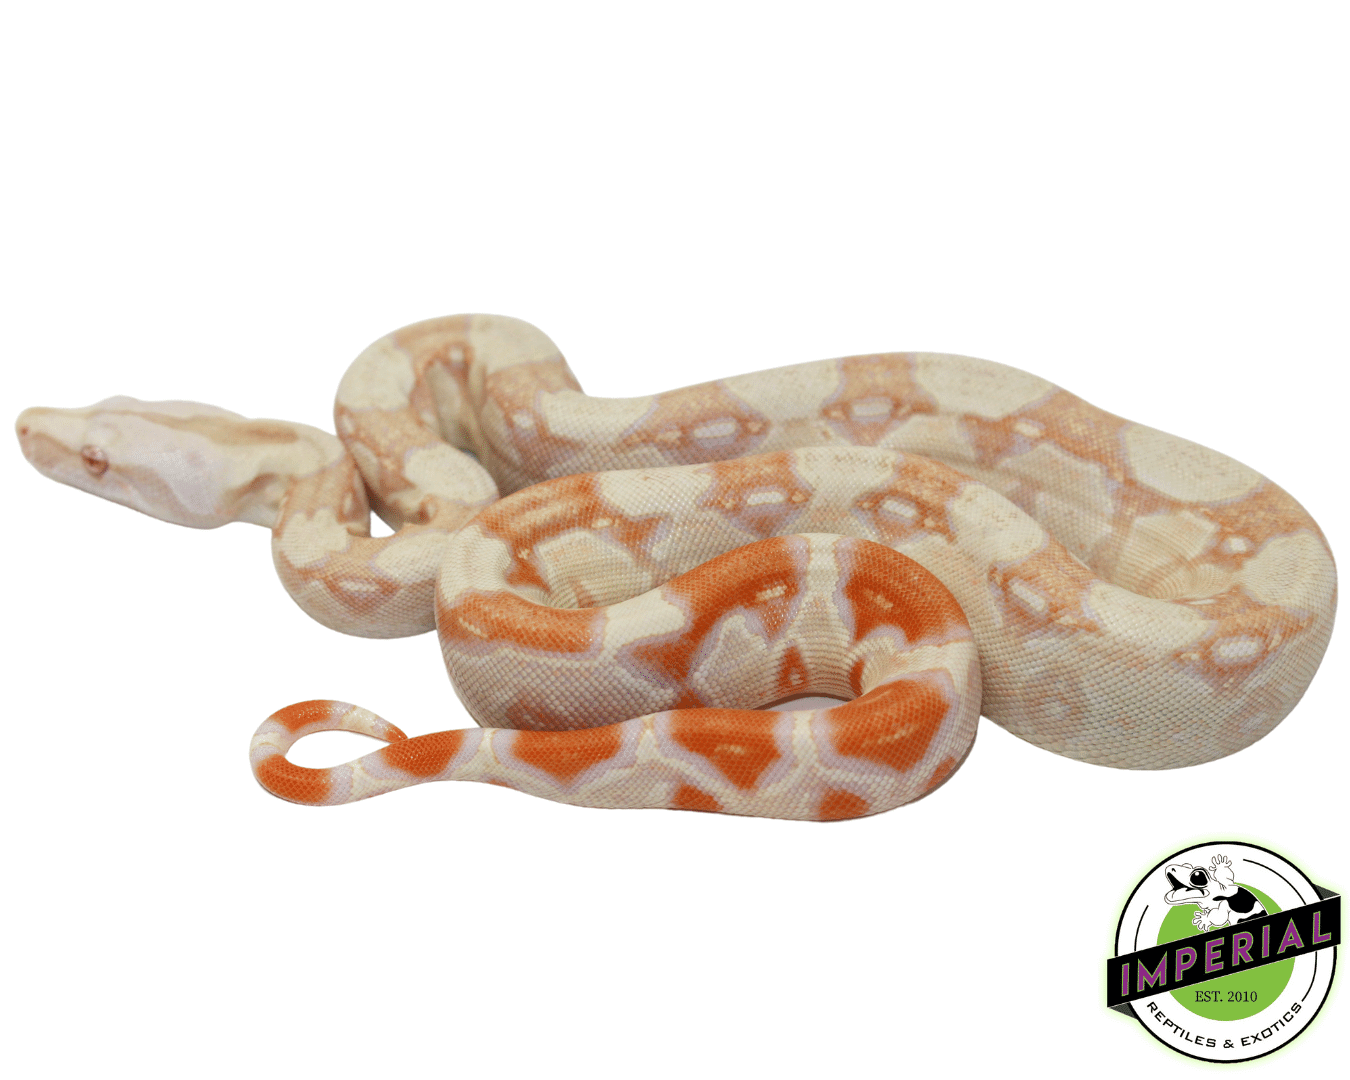 803 Albino Boa Constrictor Images, Stock Photos, 3D objects